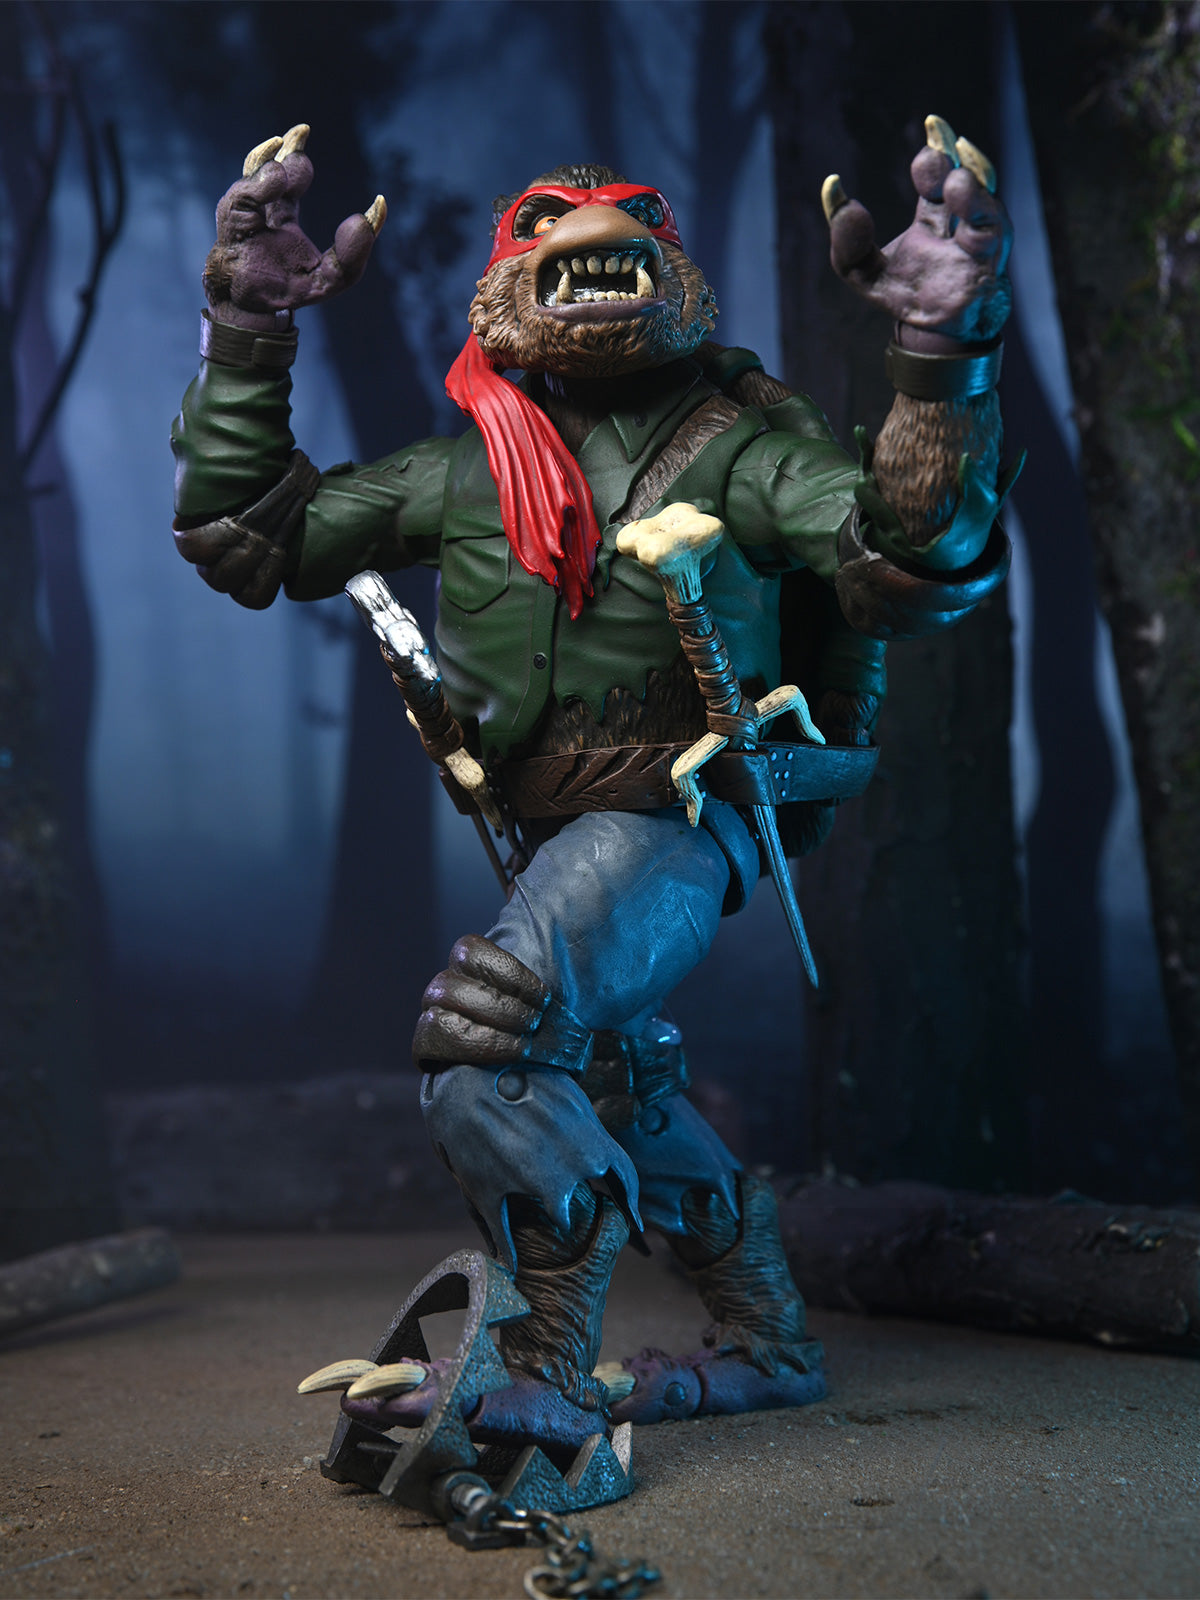 BUY NOW - TMNT RAPHAEL AS THE WOLFMAN - UNIVERSAL MONSTERS 7" SCALE ACTION FIGURE |NECA ONLINE